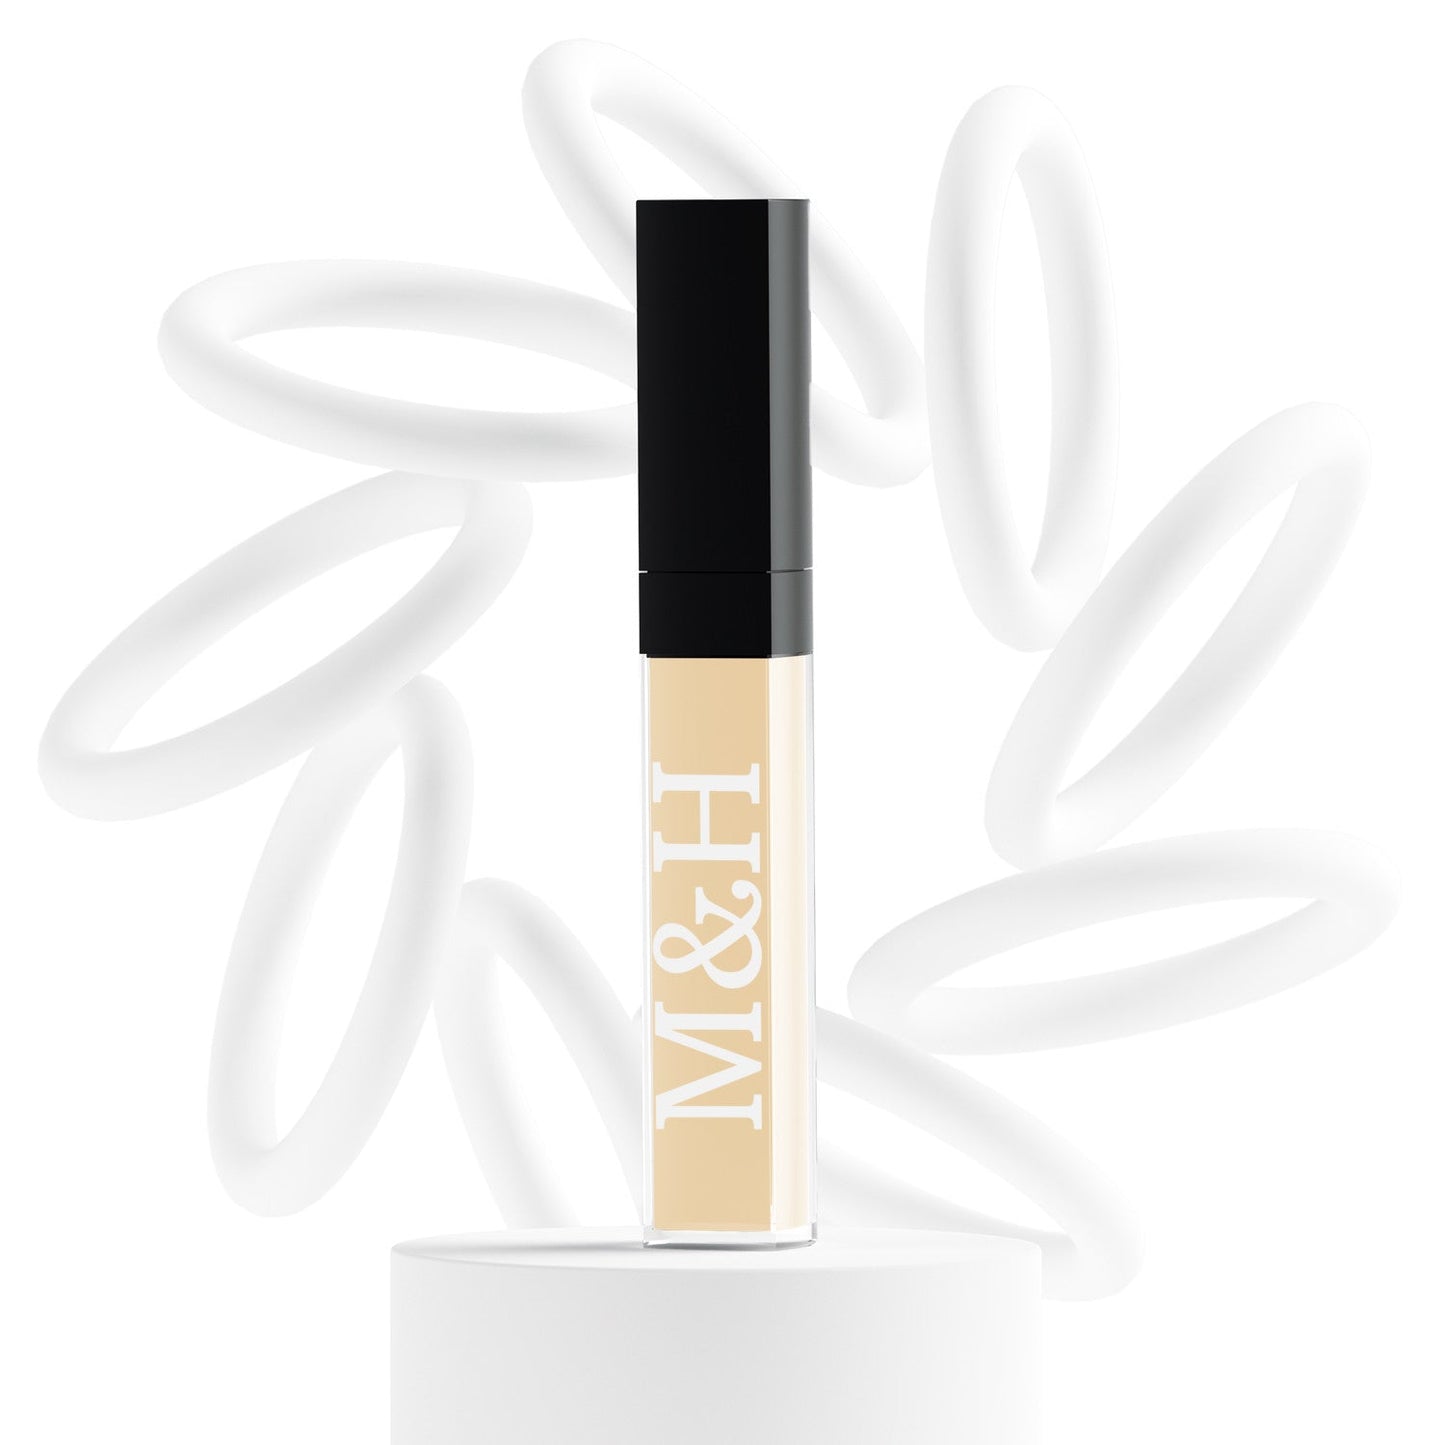 Vegan Concealers - M&H FashionVegan ConcealersconcealerM&H FashionM&H FashionConcealer-900Extra Light PorcelainVegan ConcealersM&H FashionconcealerM&H Fashion This multifunctional concealer is designed to cover under-eye circles, complexion alterations, and major imperfections like scars, hyperpigmentation, burns, and tatVegan Concealers